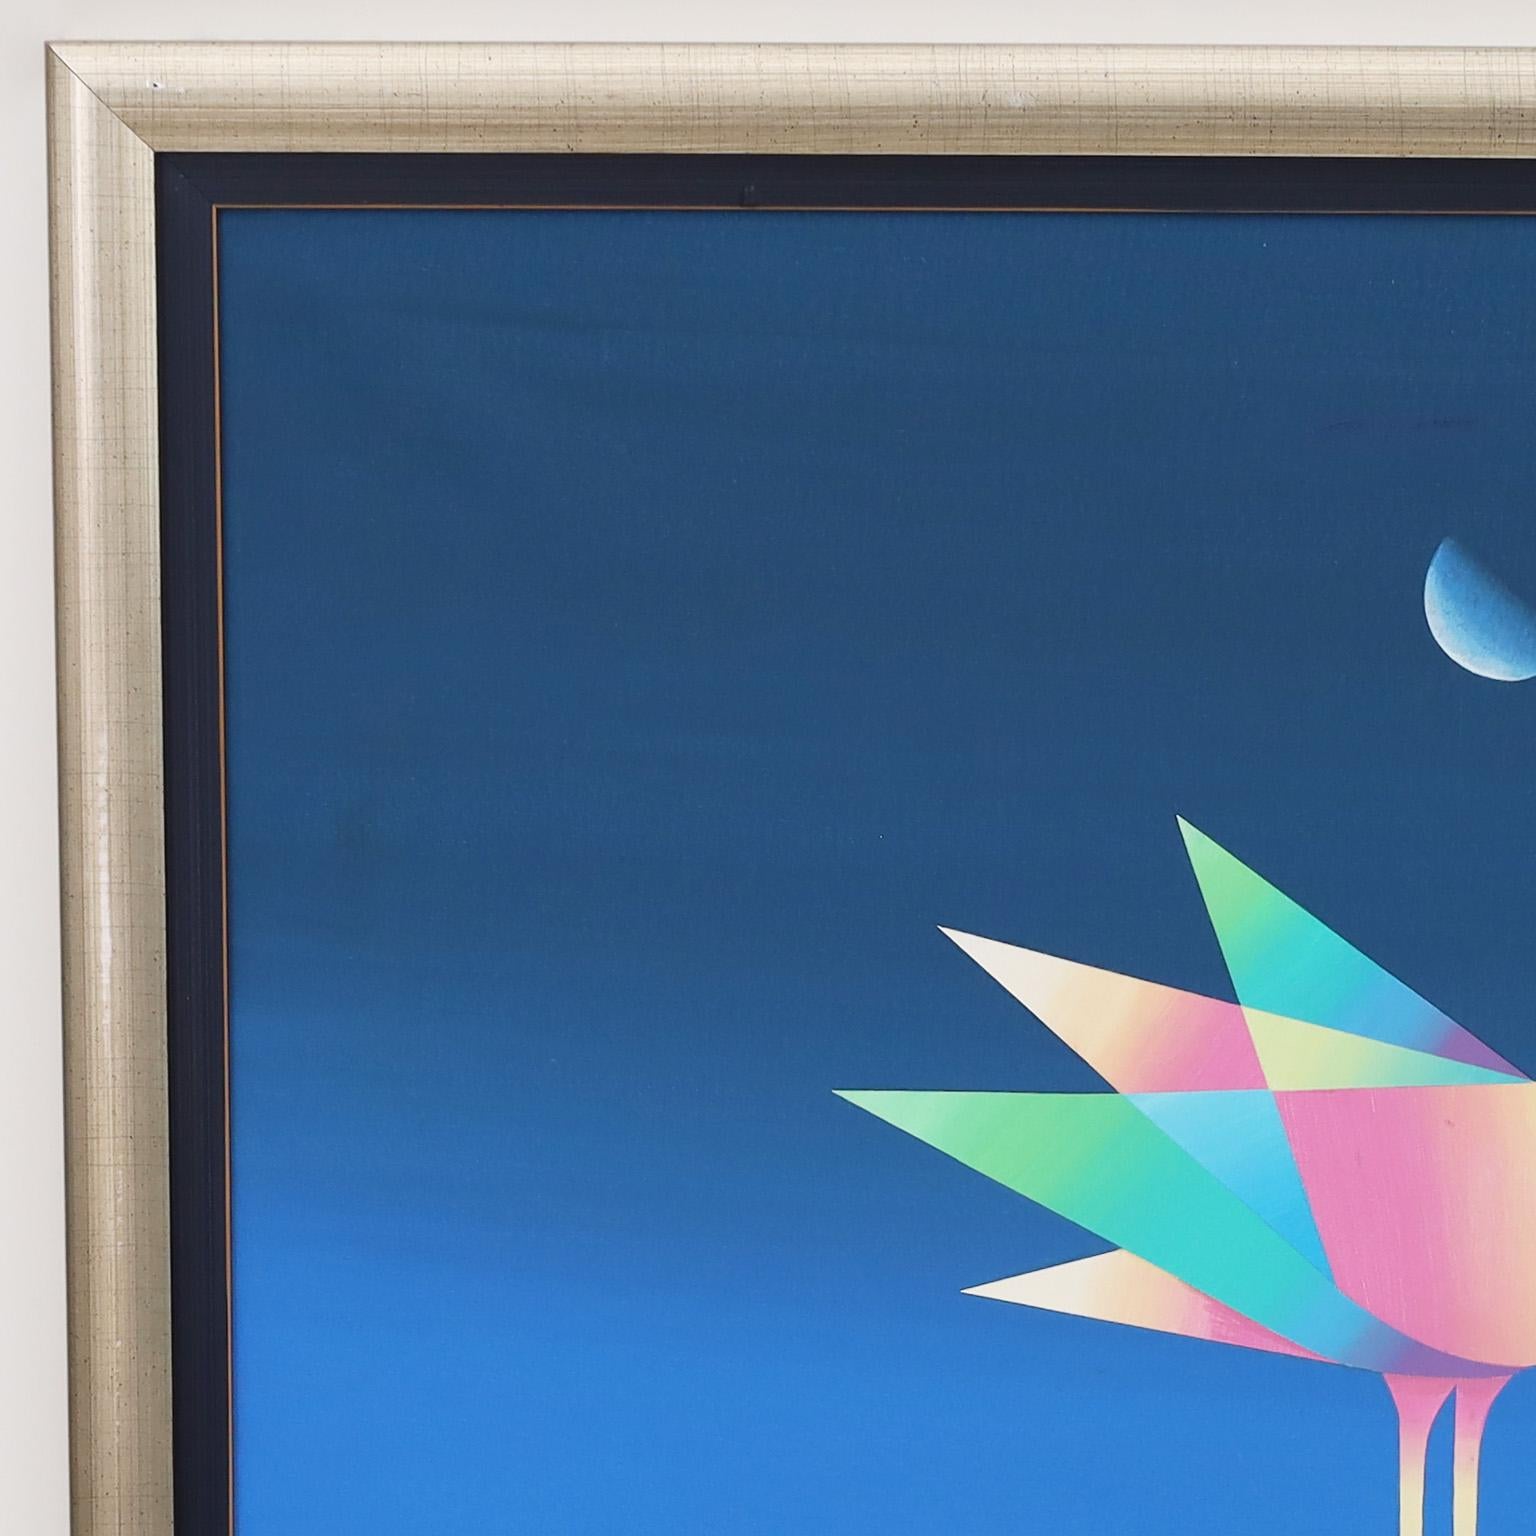 Exciting oil painting on canvas of a colorful dove on a wheel with geometric implications under a half moon and over a landscape. Executed in a modern surrealist style. Signed by noted Brazilian artist Braz Dias and presented in a silver gilt wood